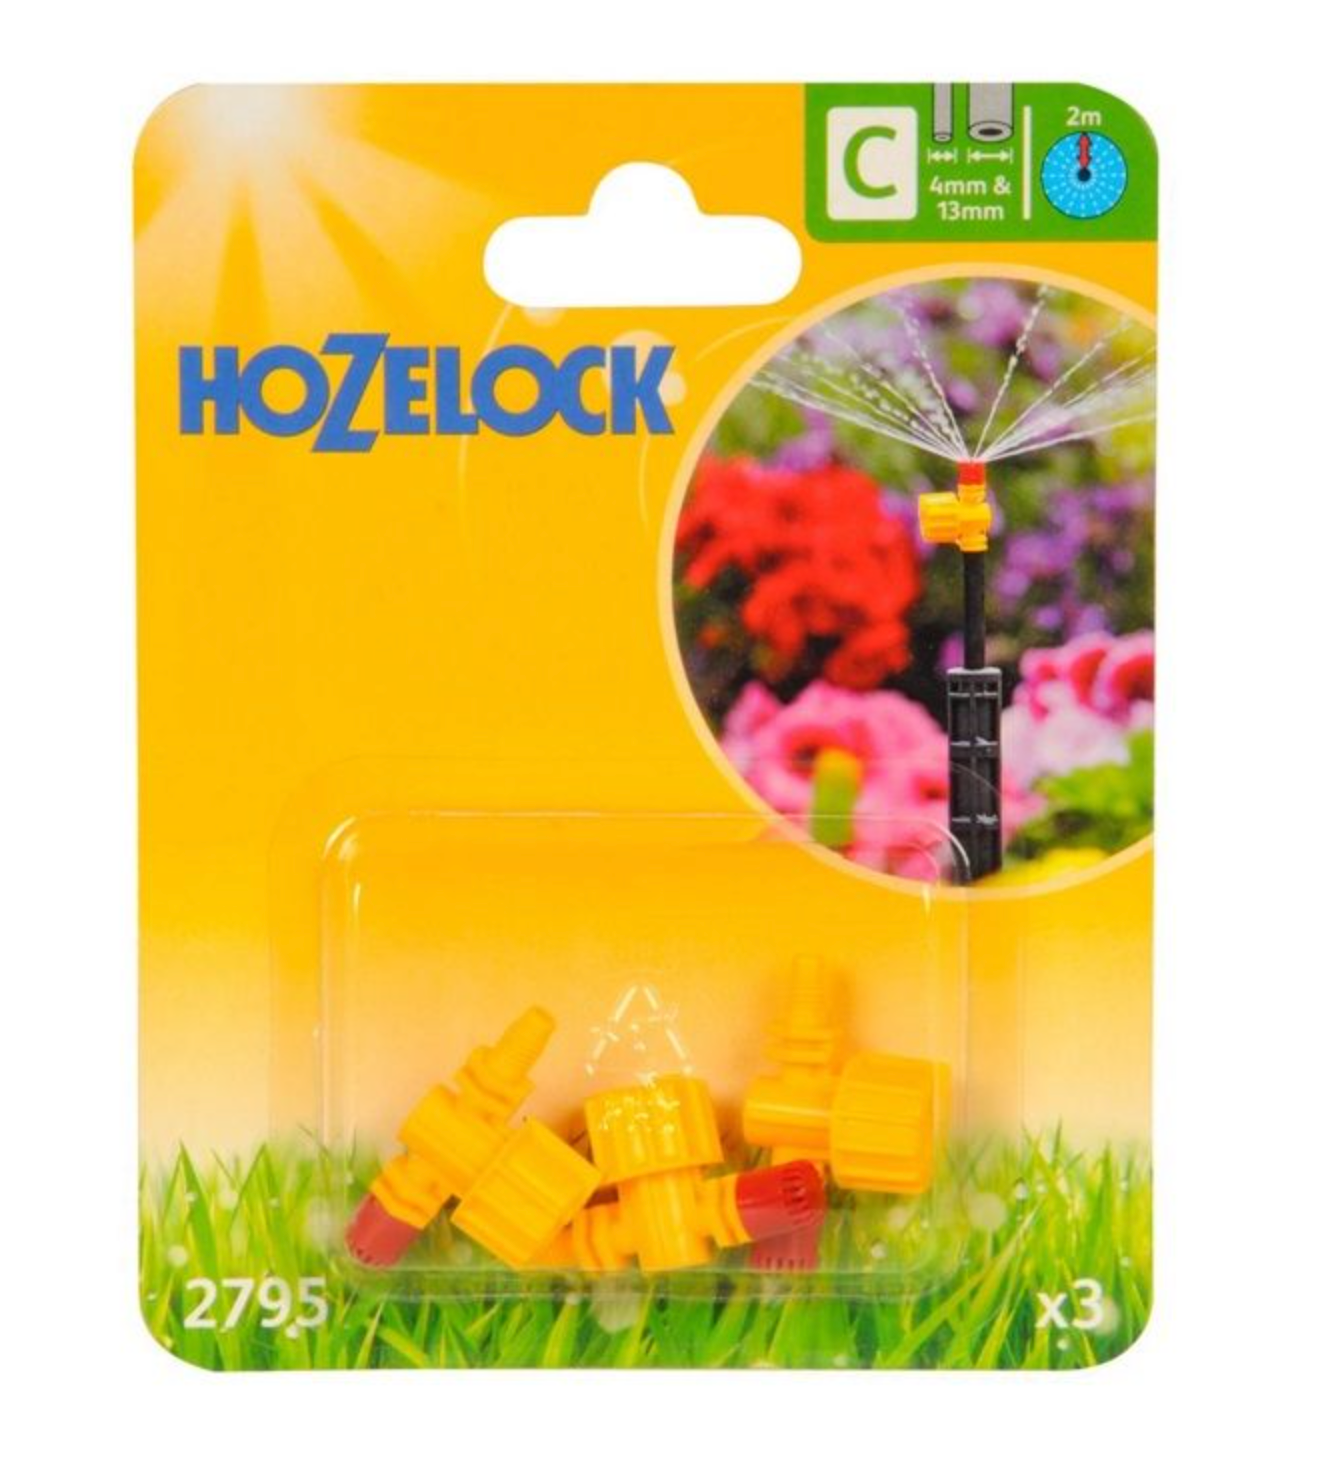 Hozelock 2795 Adjustable Microjet 360° 4mm & 13mm - Pack of 3